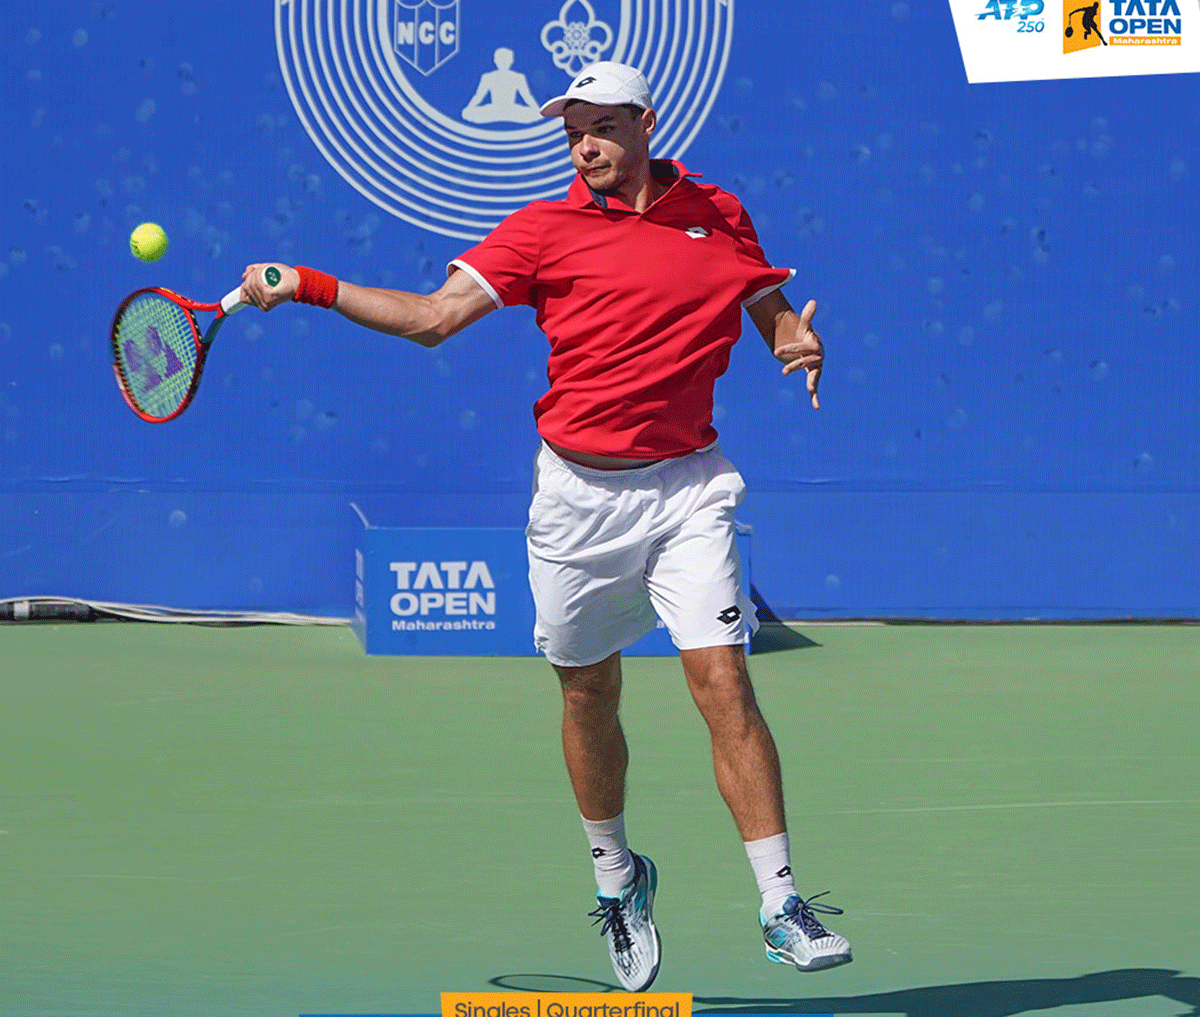 Poland's Kamil Majchrzak plays a return during his victory over second seed Lorenzo Musetti in the quarter-final of the Tata Open Maharashtra at the Balewadi Stadium in Pune on Friday